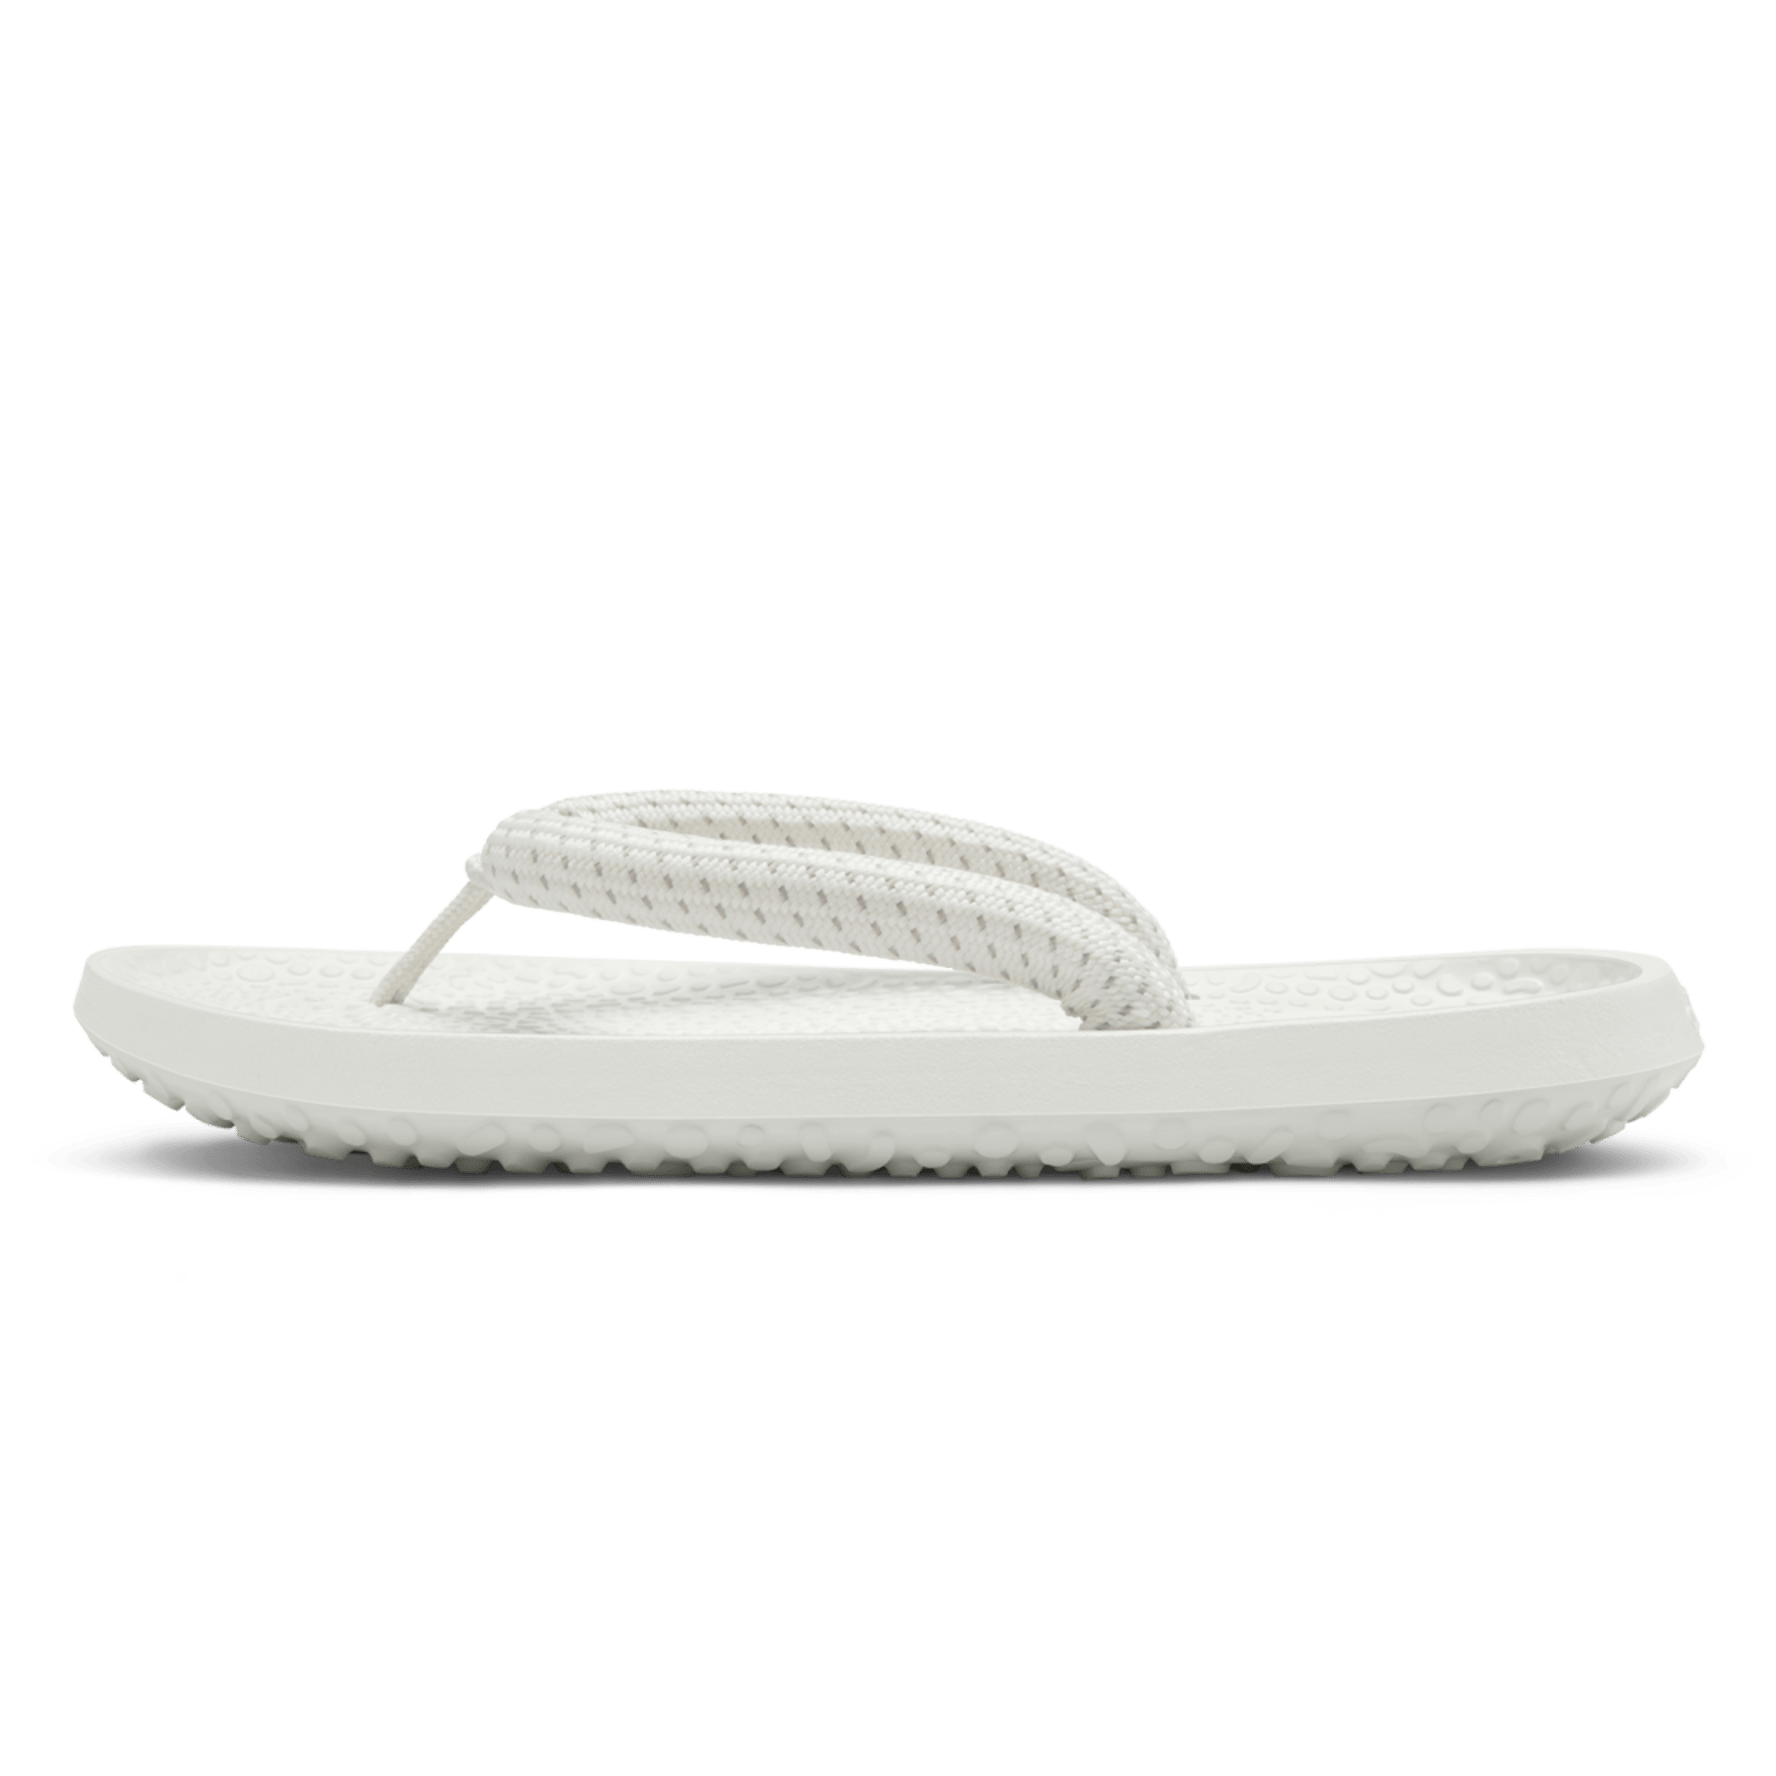 First pair of Allbirds - Sugar Sliders in Blizzard: are sandals made for  walking long distances? I bought these hoping they won't create blisters on  the top of my feet but… I